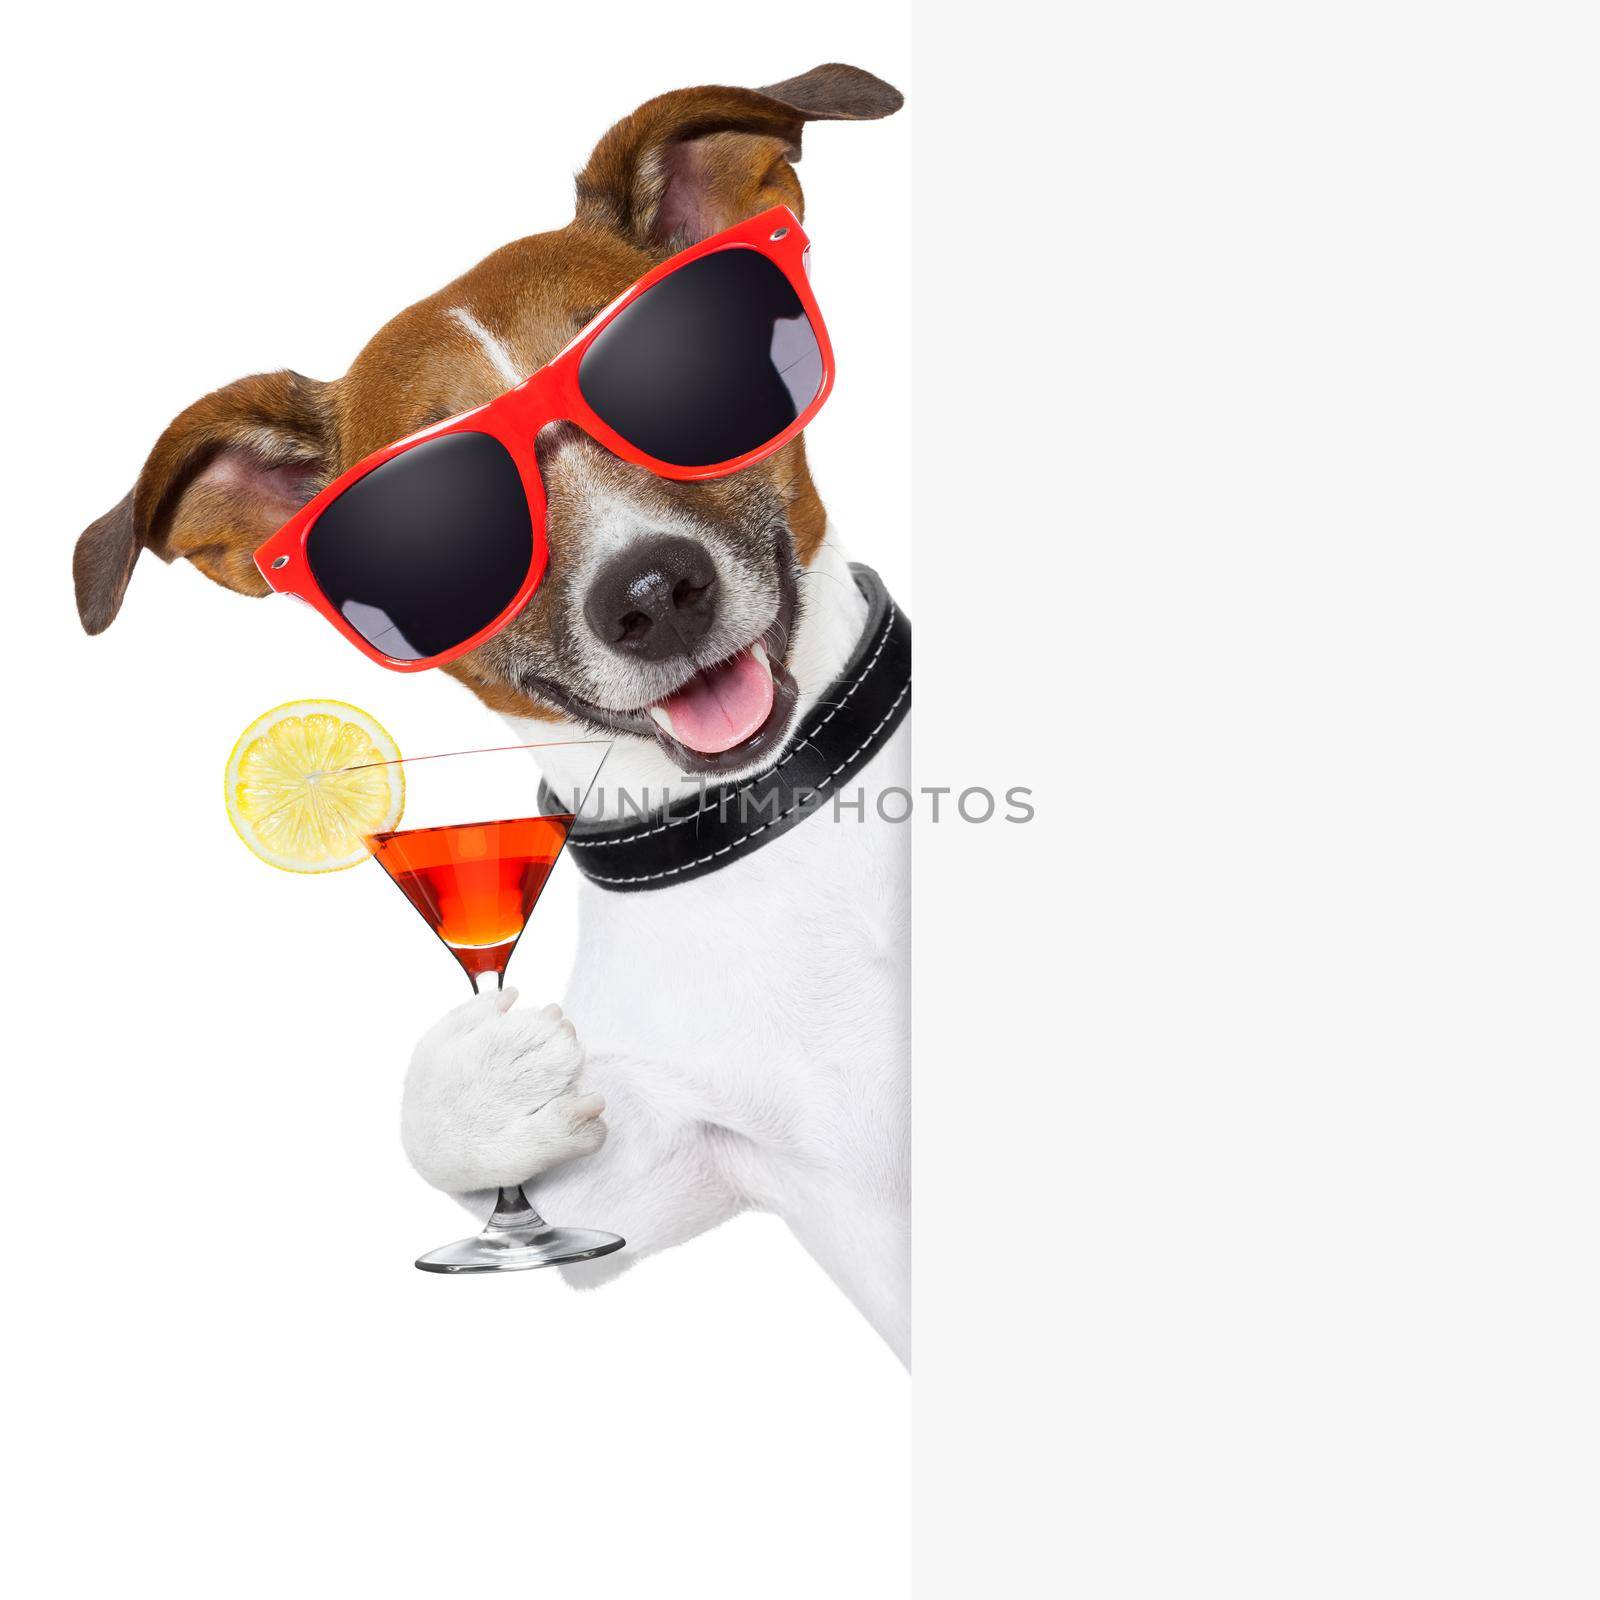 funny cocktail dog holding a martini glass behind a banner